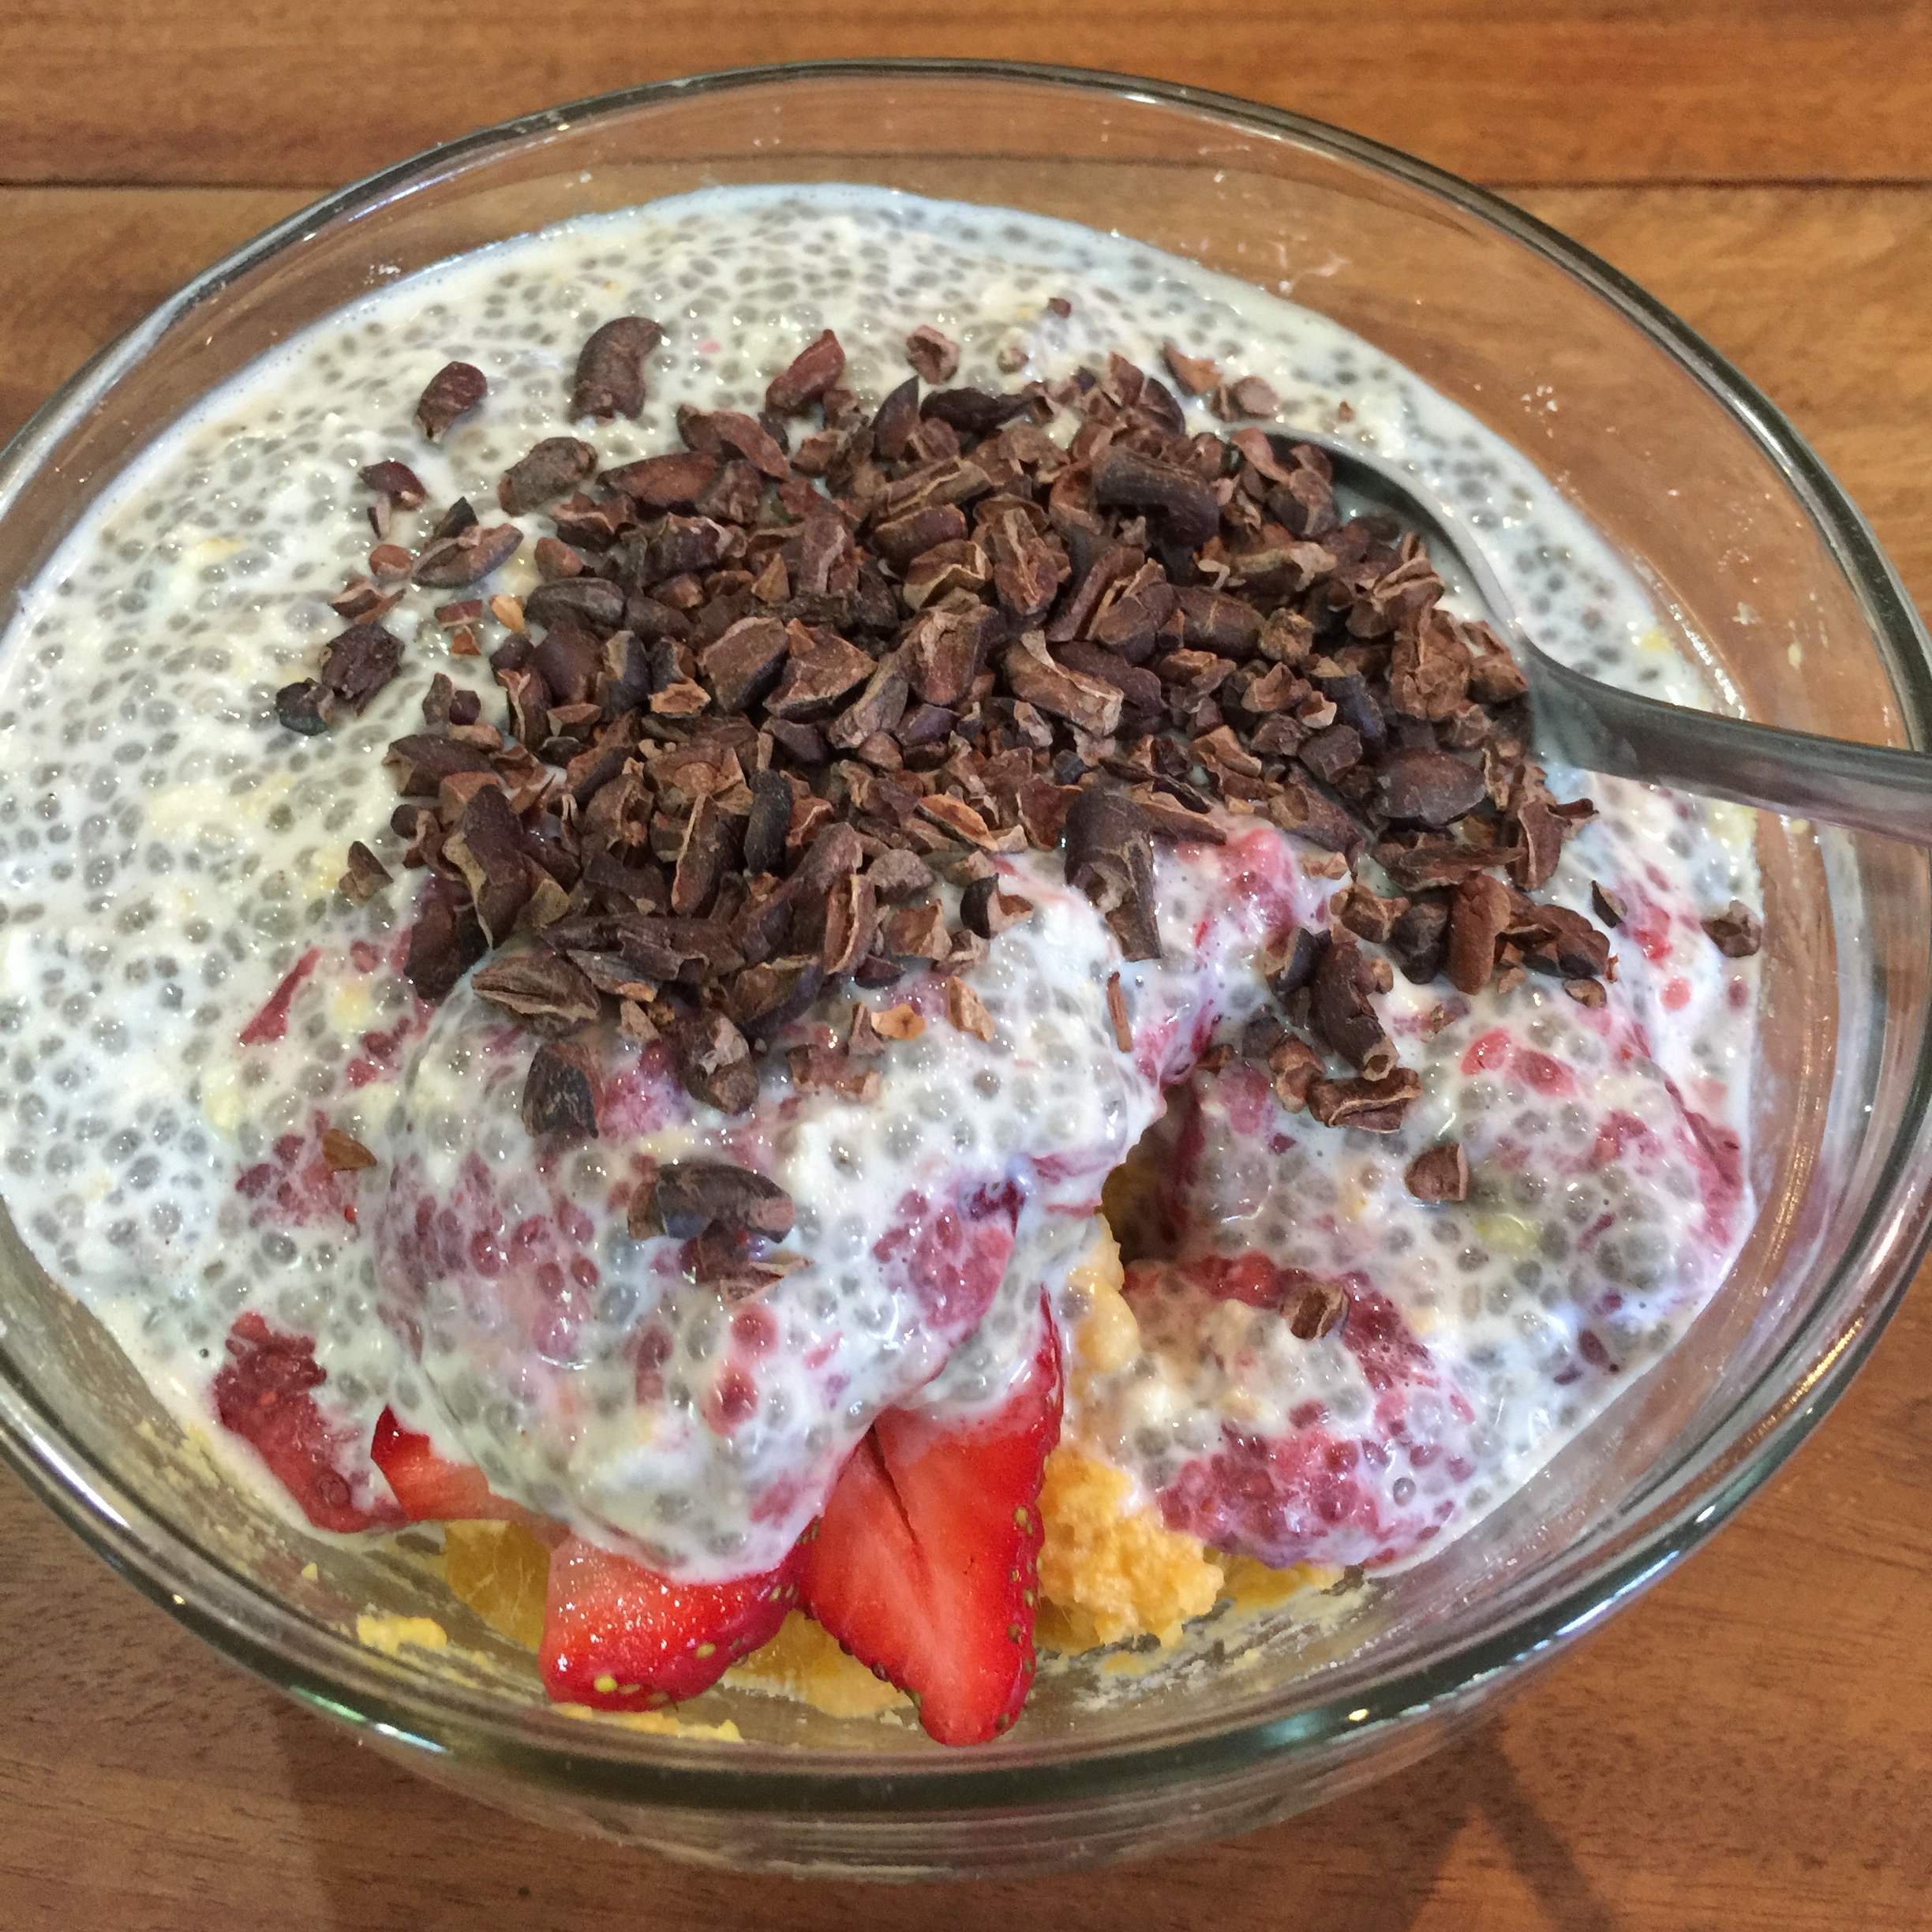 Snack: Vanilla chia oat pudding with fresh strawberries & cacao nibs, over mashed sweet potatoes... sounds weird till you try it!